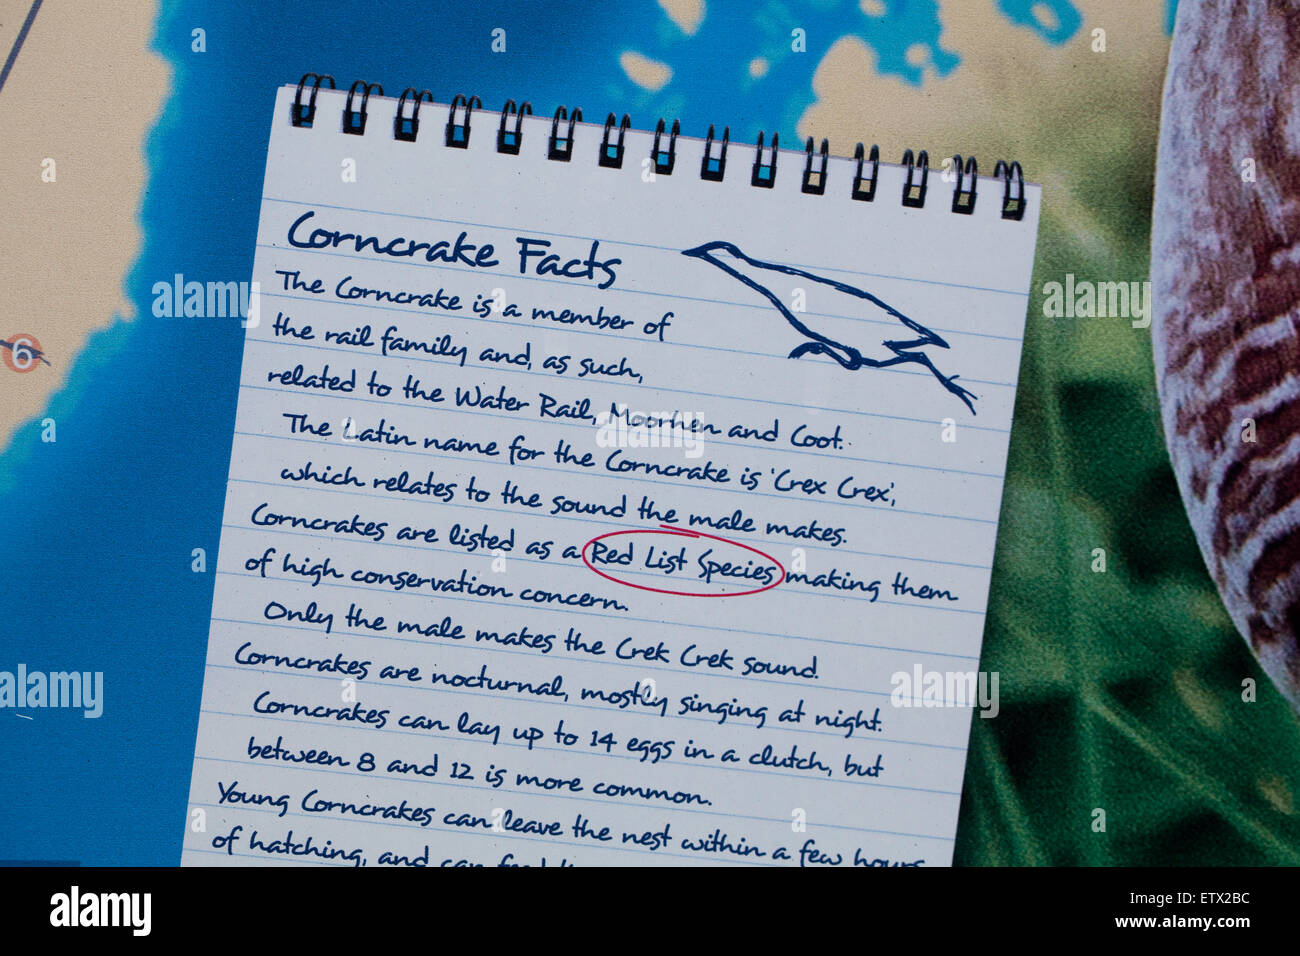 Corncrake Facts - an impression of hand written notes as a part of an composite information sign, for visitors to Iona. Scotland Stock Photo